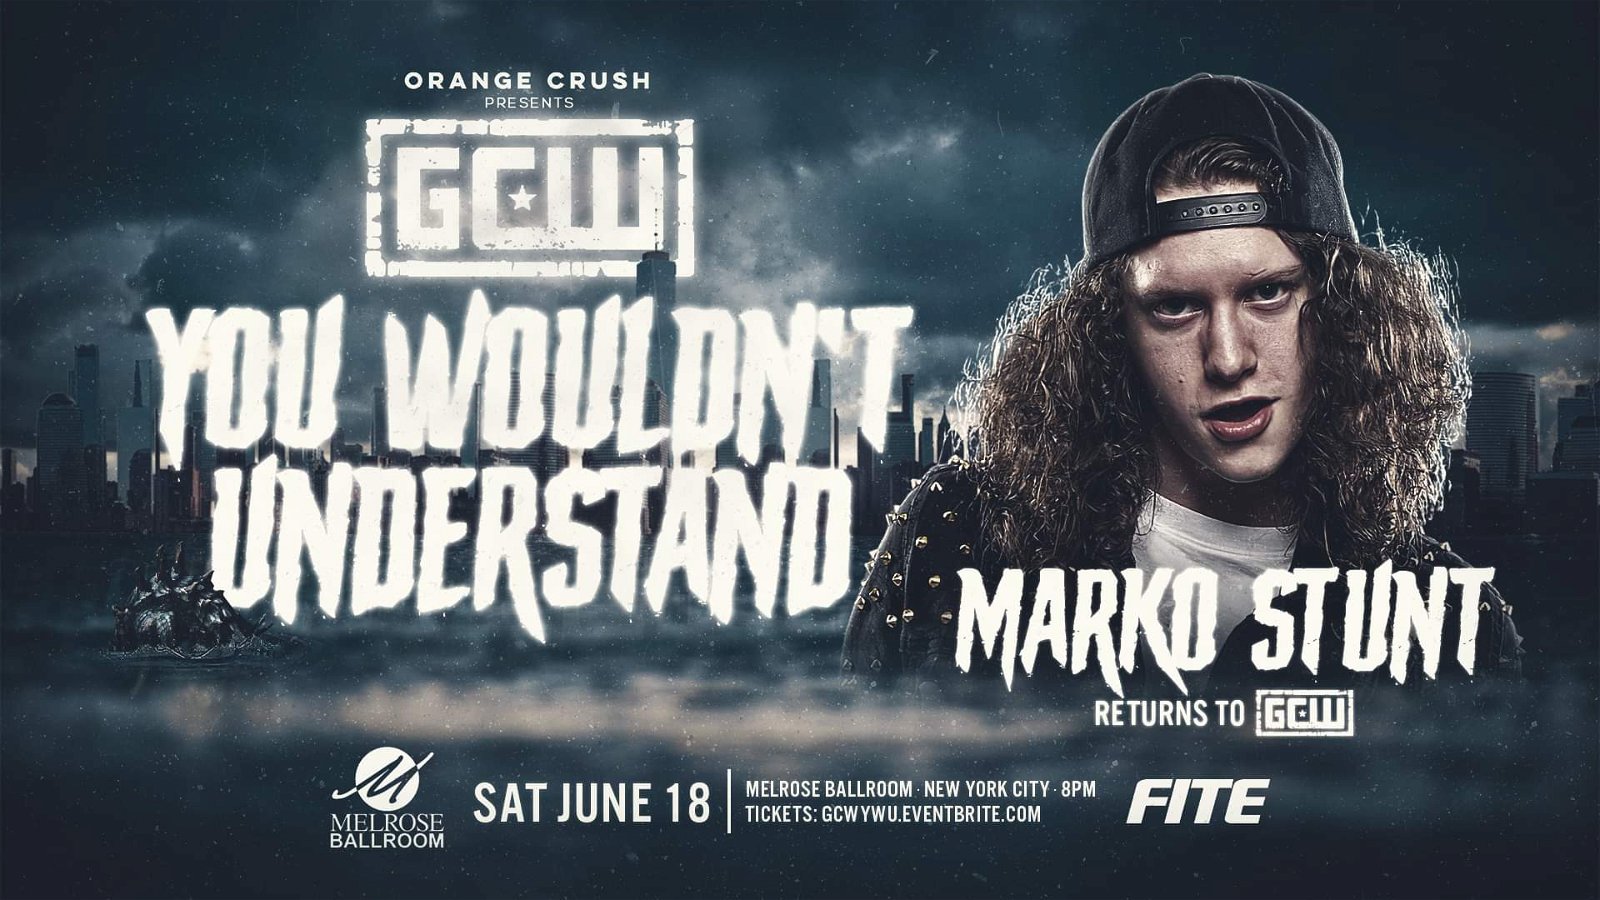 Recent AEW Departure Marko Stunt Announced For GCW ‘You Wouldn’t Understand’